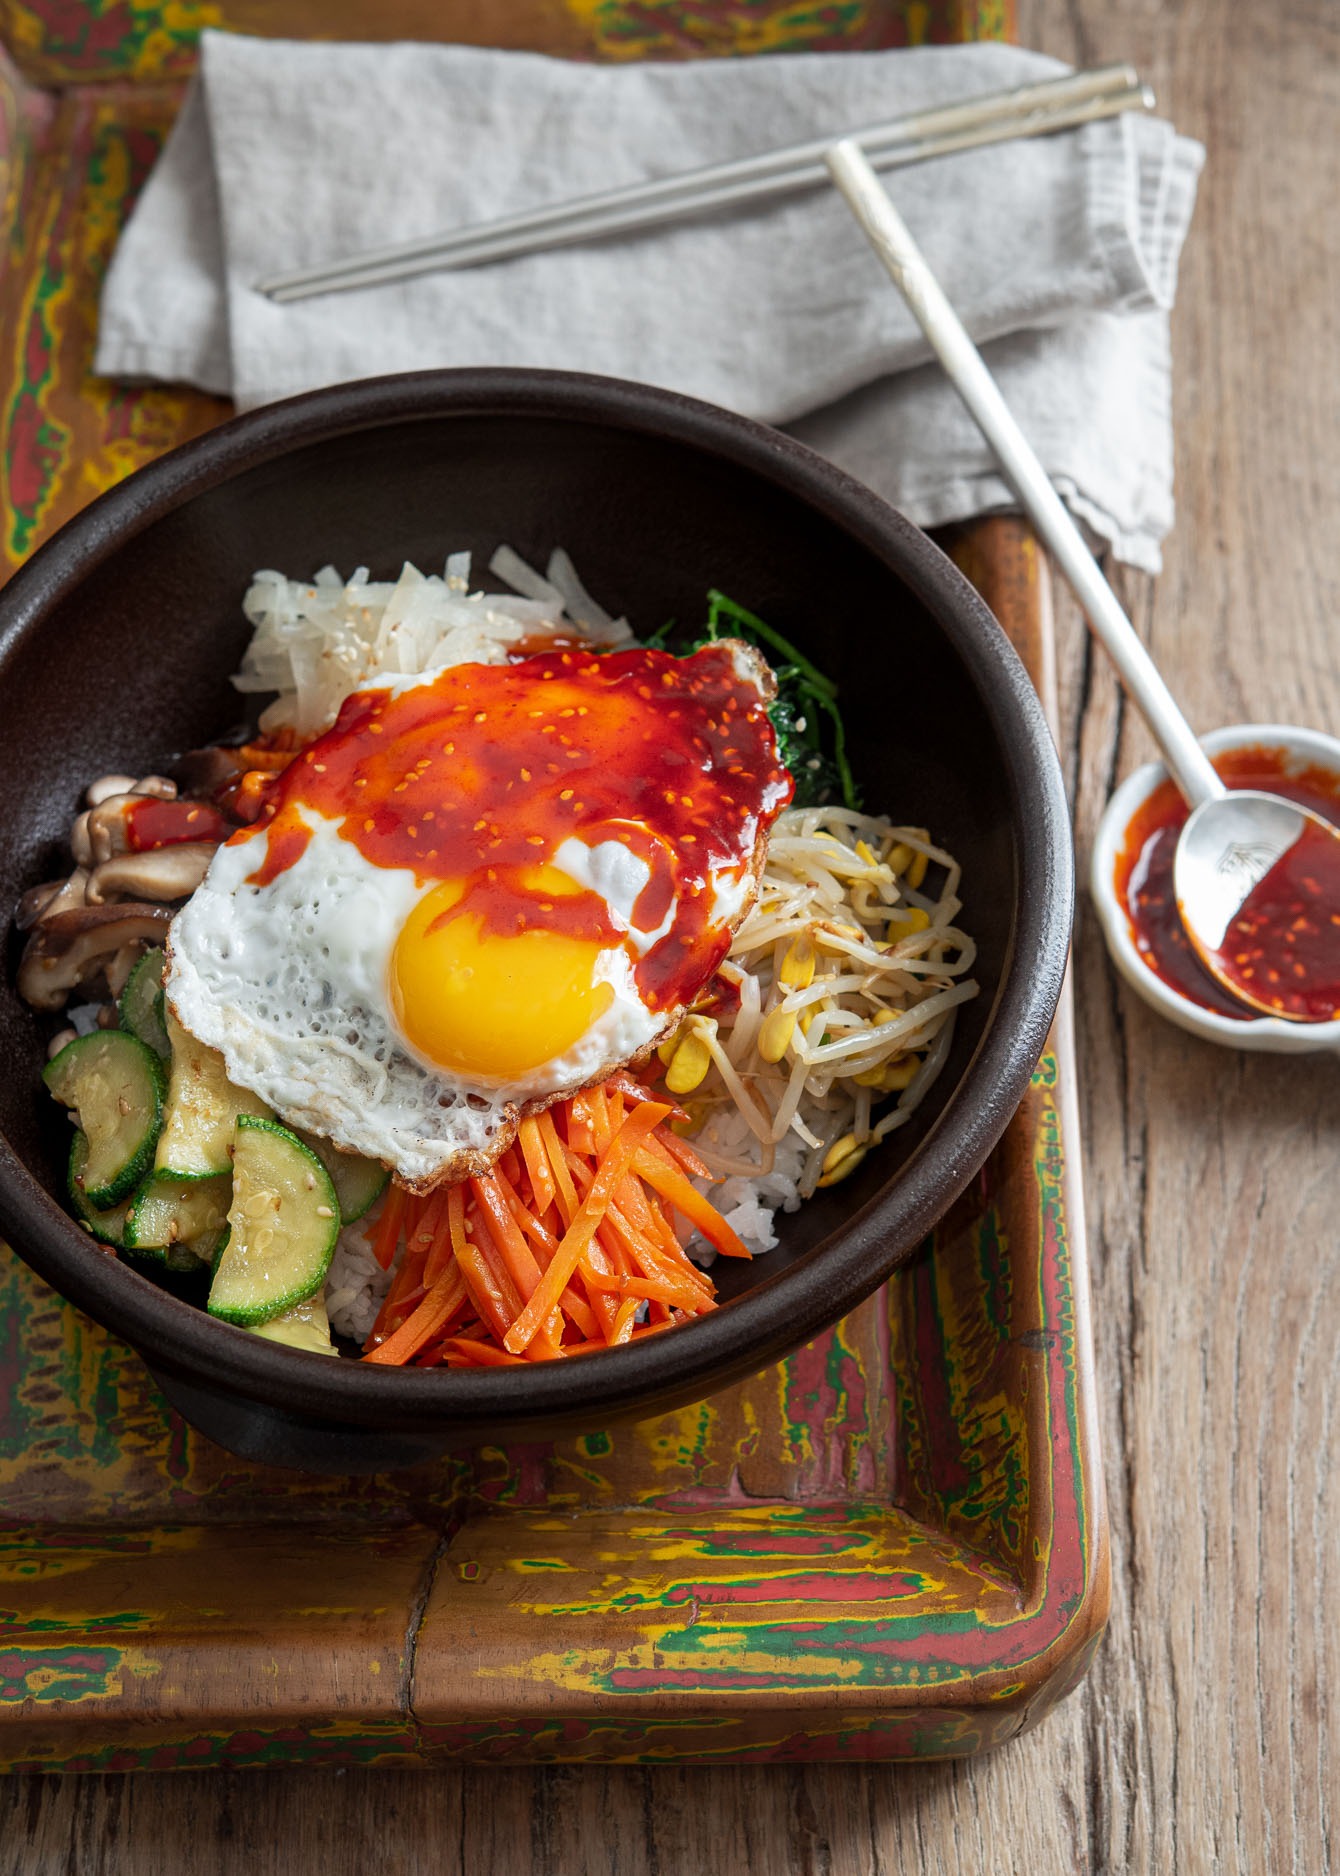 A bowl of Korean bibimbap on a wooden tray served with gochujang sauce on the side.